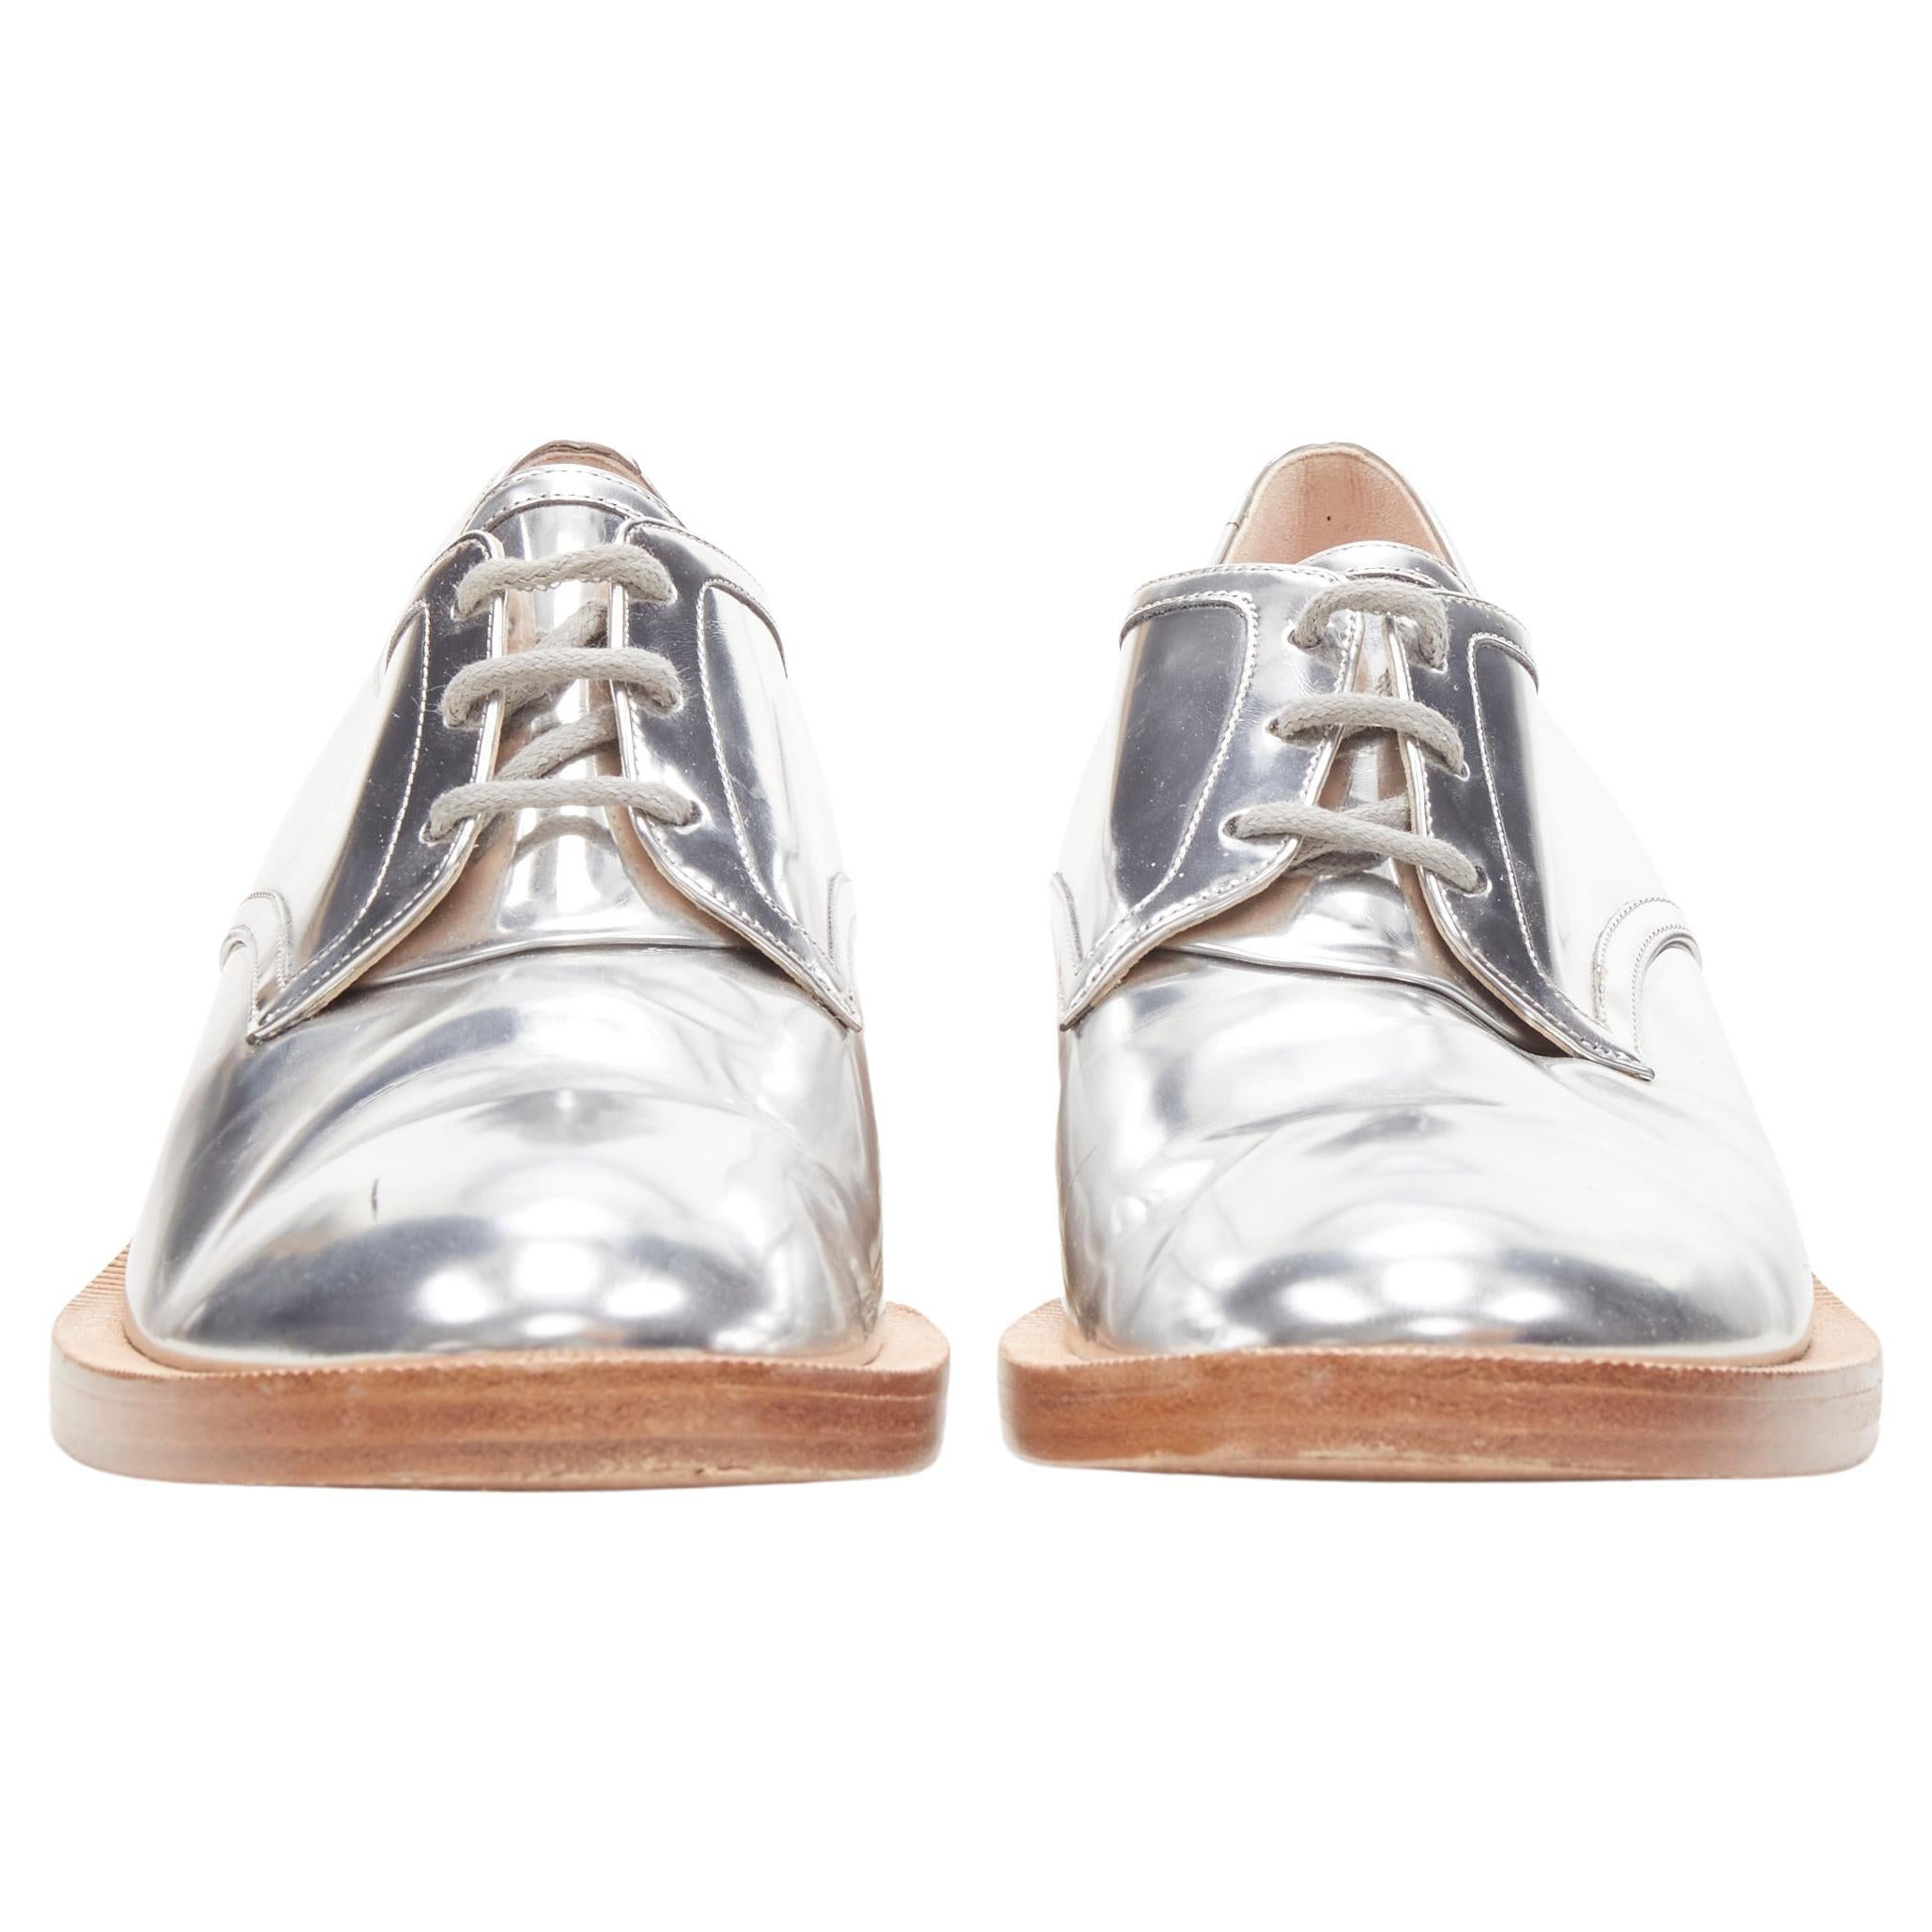 NICHOLAS KIRKWOOD metallic silver pearl embellished gold heel brogue loafer EU39
Brand: Nicholas Kirkwood
Material: Leather
Color: Silver
Pattern: Solid
Closure: Lace Up
Extra Detail: Faux pearl and gold-tone mirrored metal heel.
Made in: